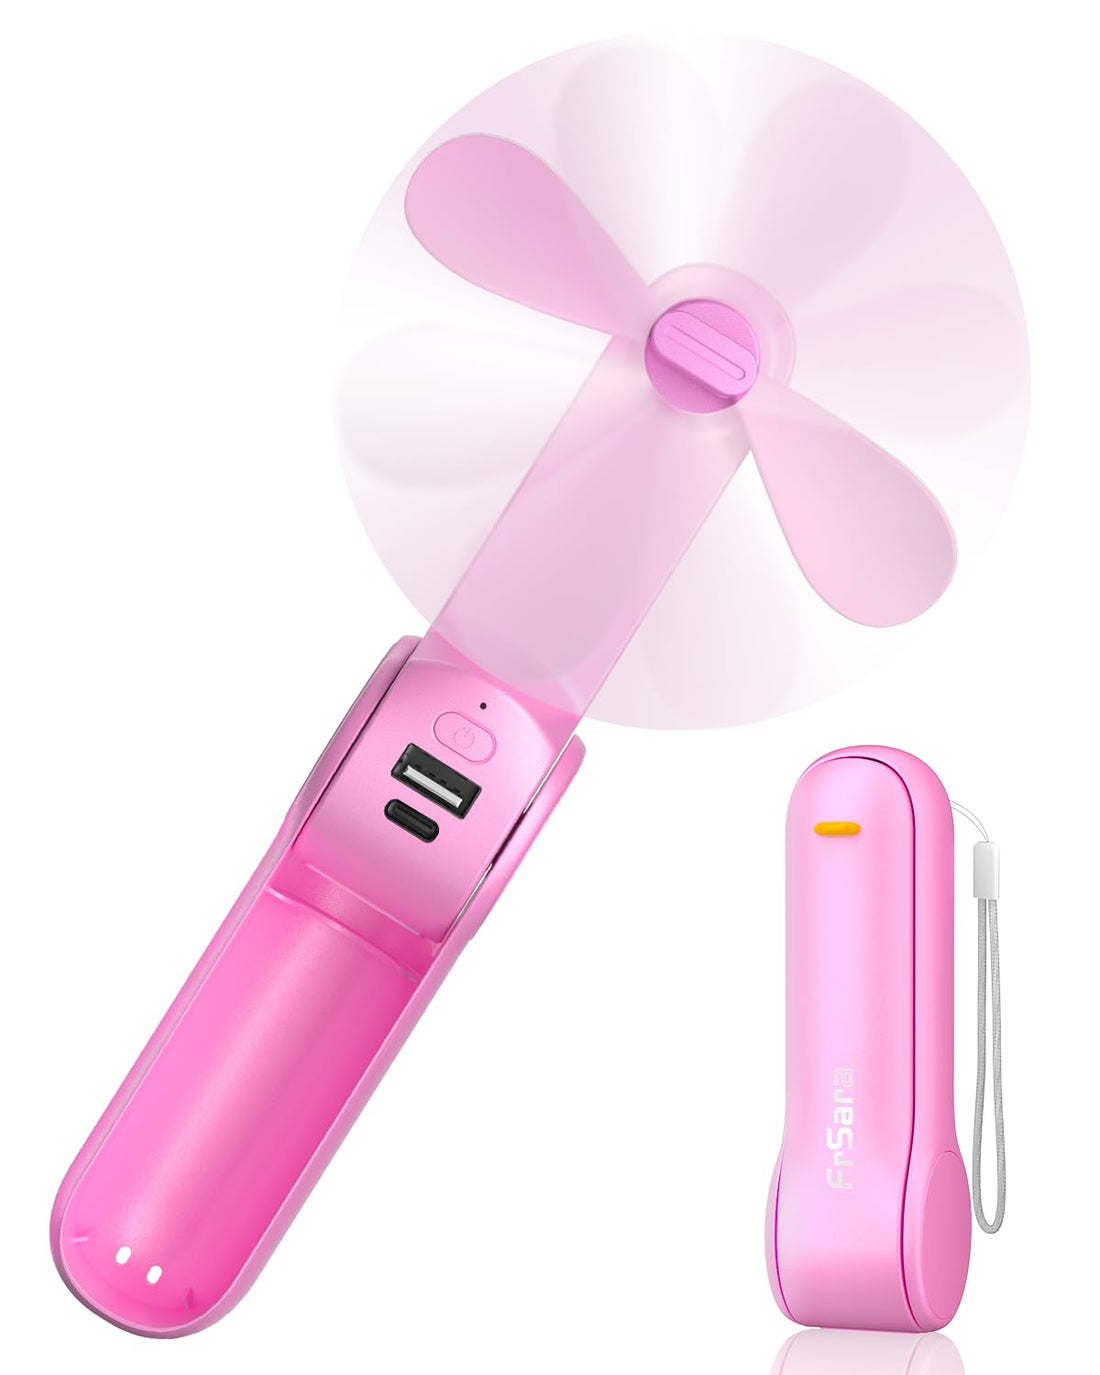 FrSara Portable Handheld Fan Rechargeable, USB Rechargeable Small Pocket Fan, 2000mAh Battery With Power Bank, Upgraded Long Battery Life, Three-Speed, Suitable for Women Outdoors and Travel